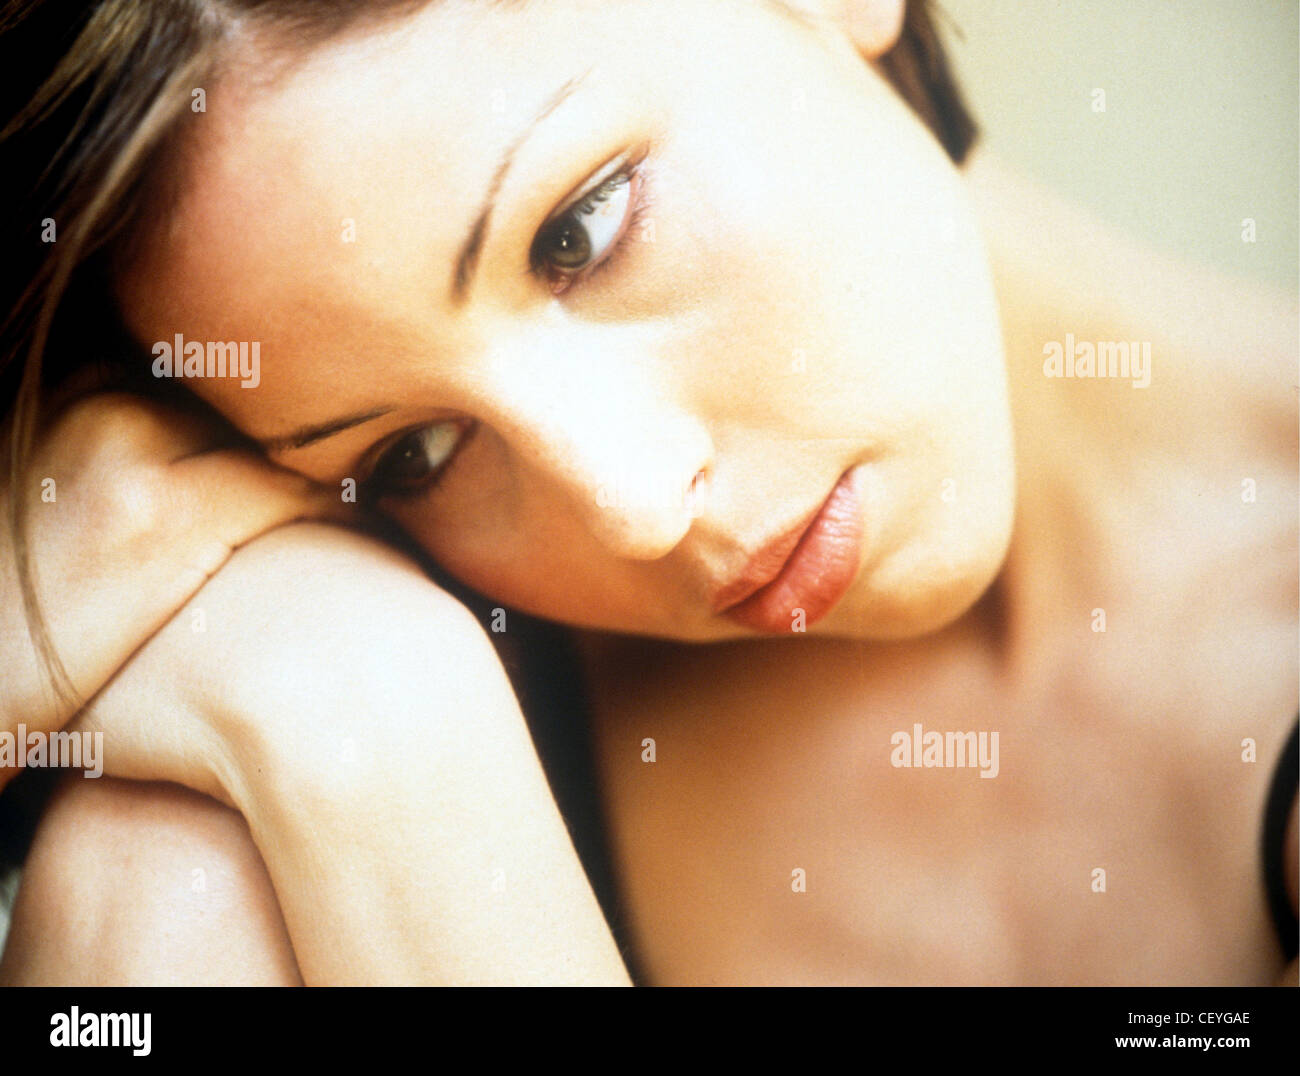 Female with short brunette hair, wearing subtle make up, resting her head on hands, unsmiling, looking down Stock Photo